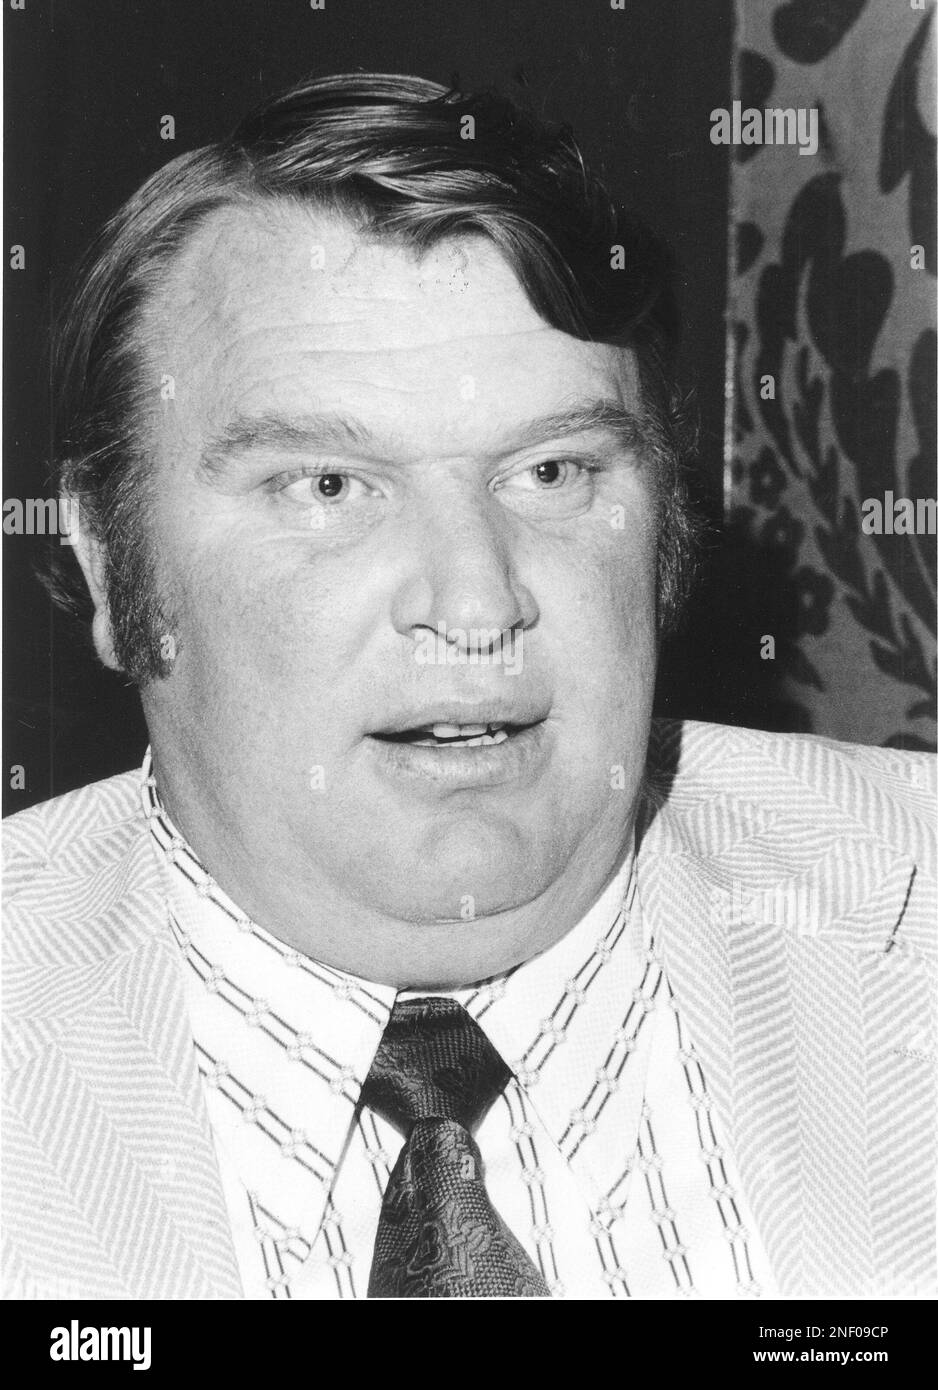 John Madden wipes away a tear at a news conference, Thursday, Jan. 4, 1979  in Oakland at which he announced he is retiring as coach of the Oakland  Raiders. “I'm never going